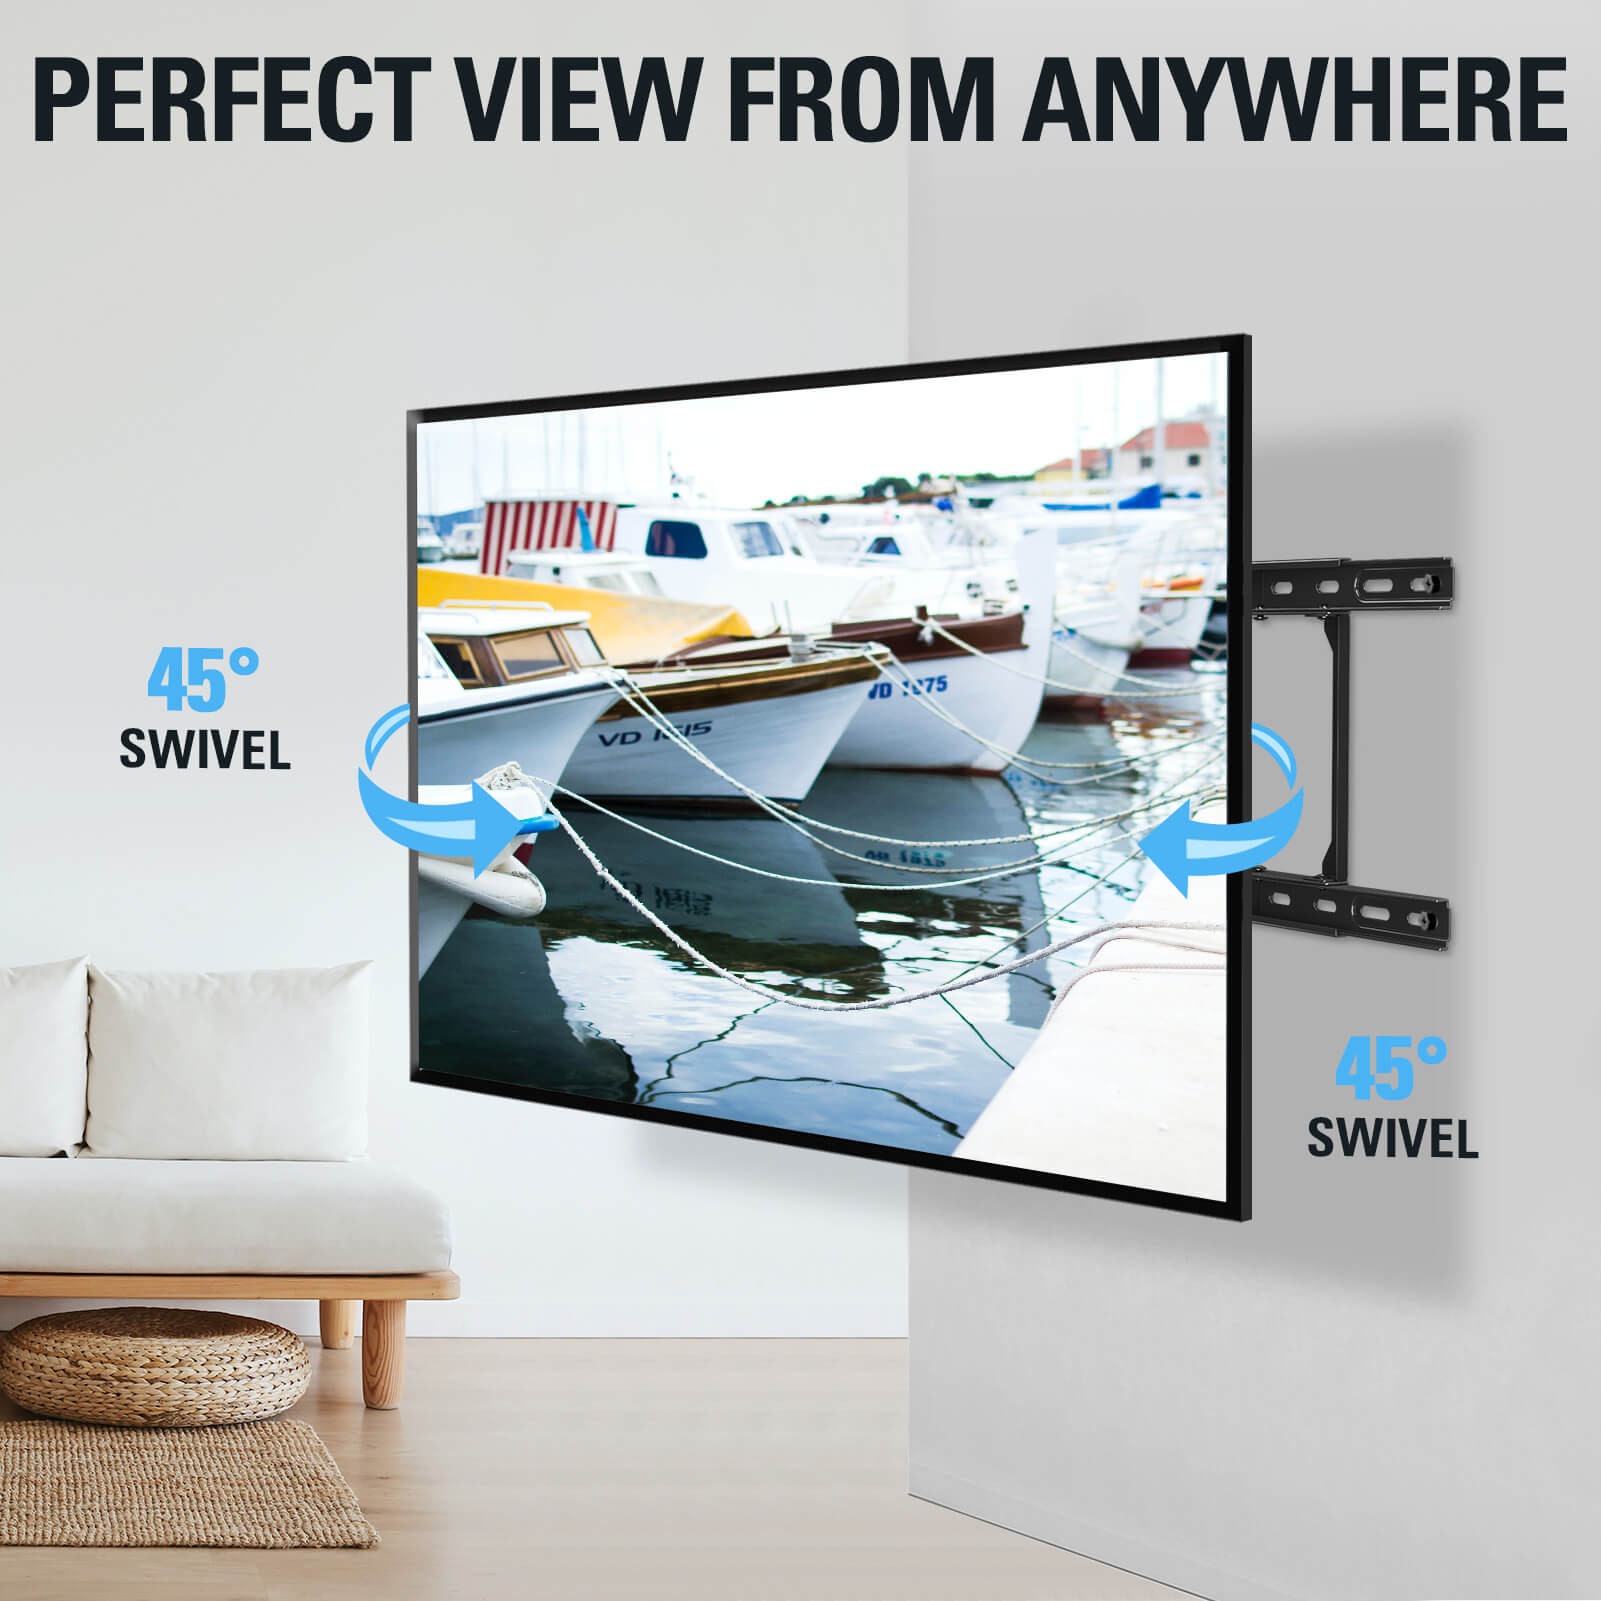 swivel TV mount allows perfect viewing from anywhere